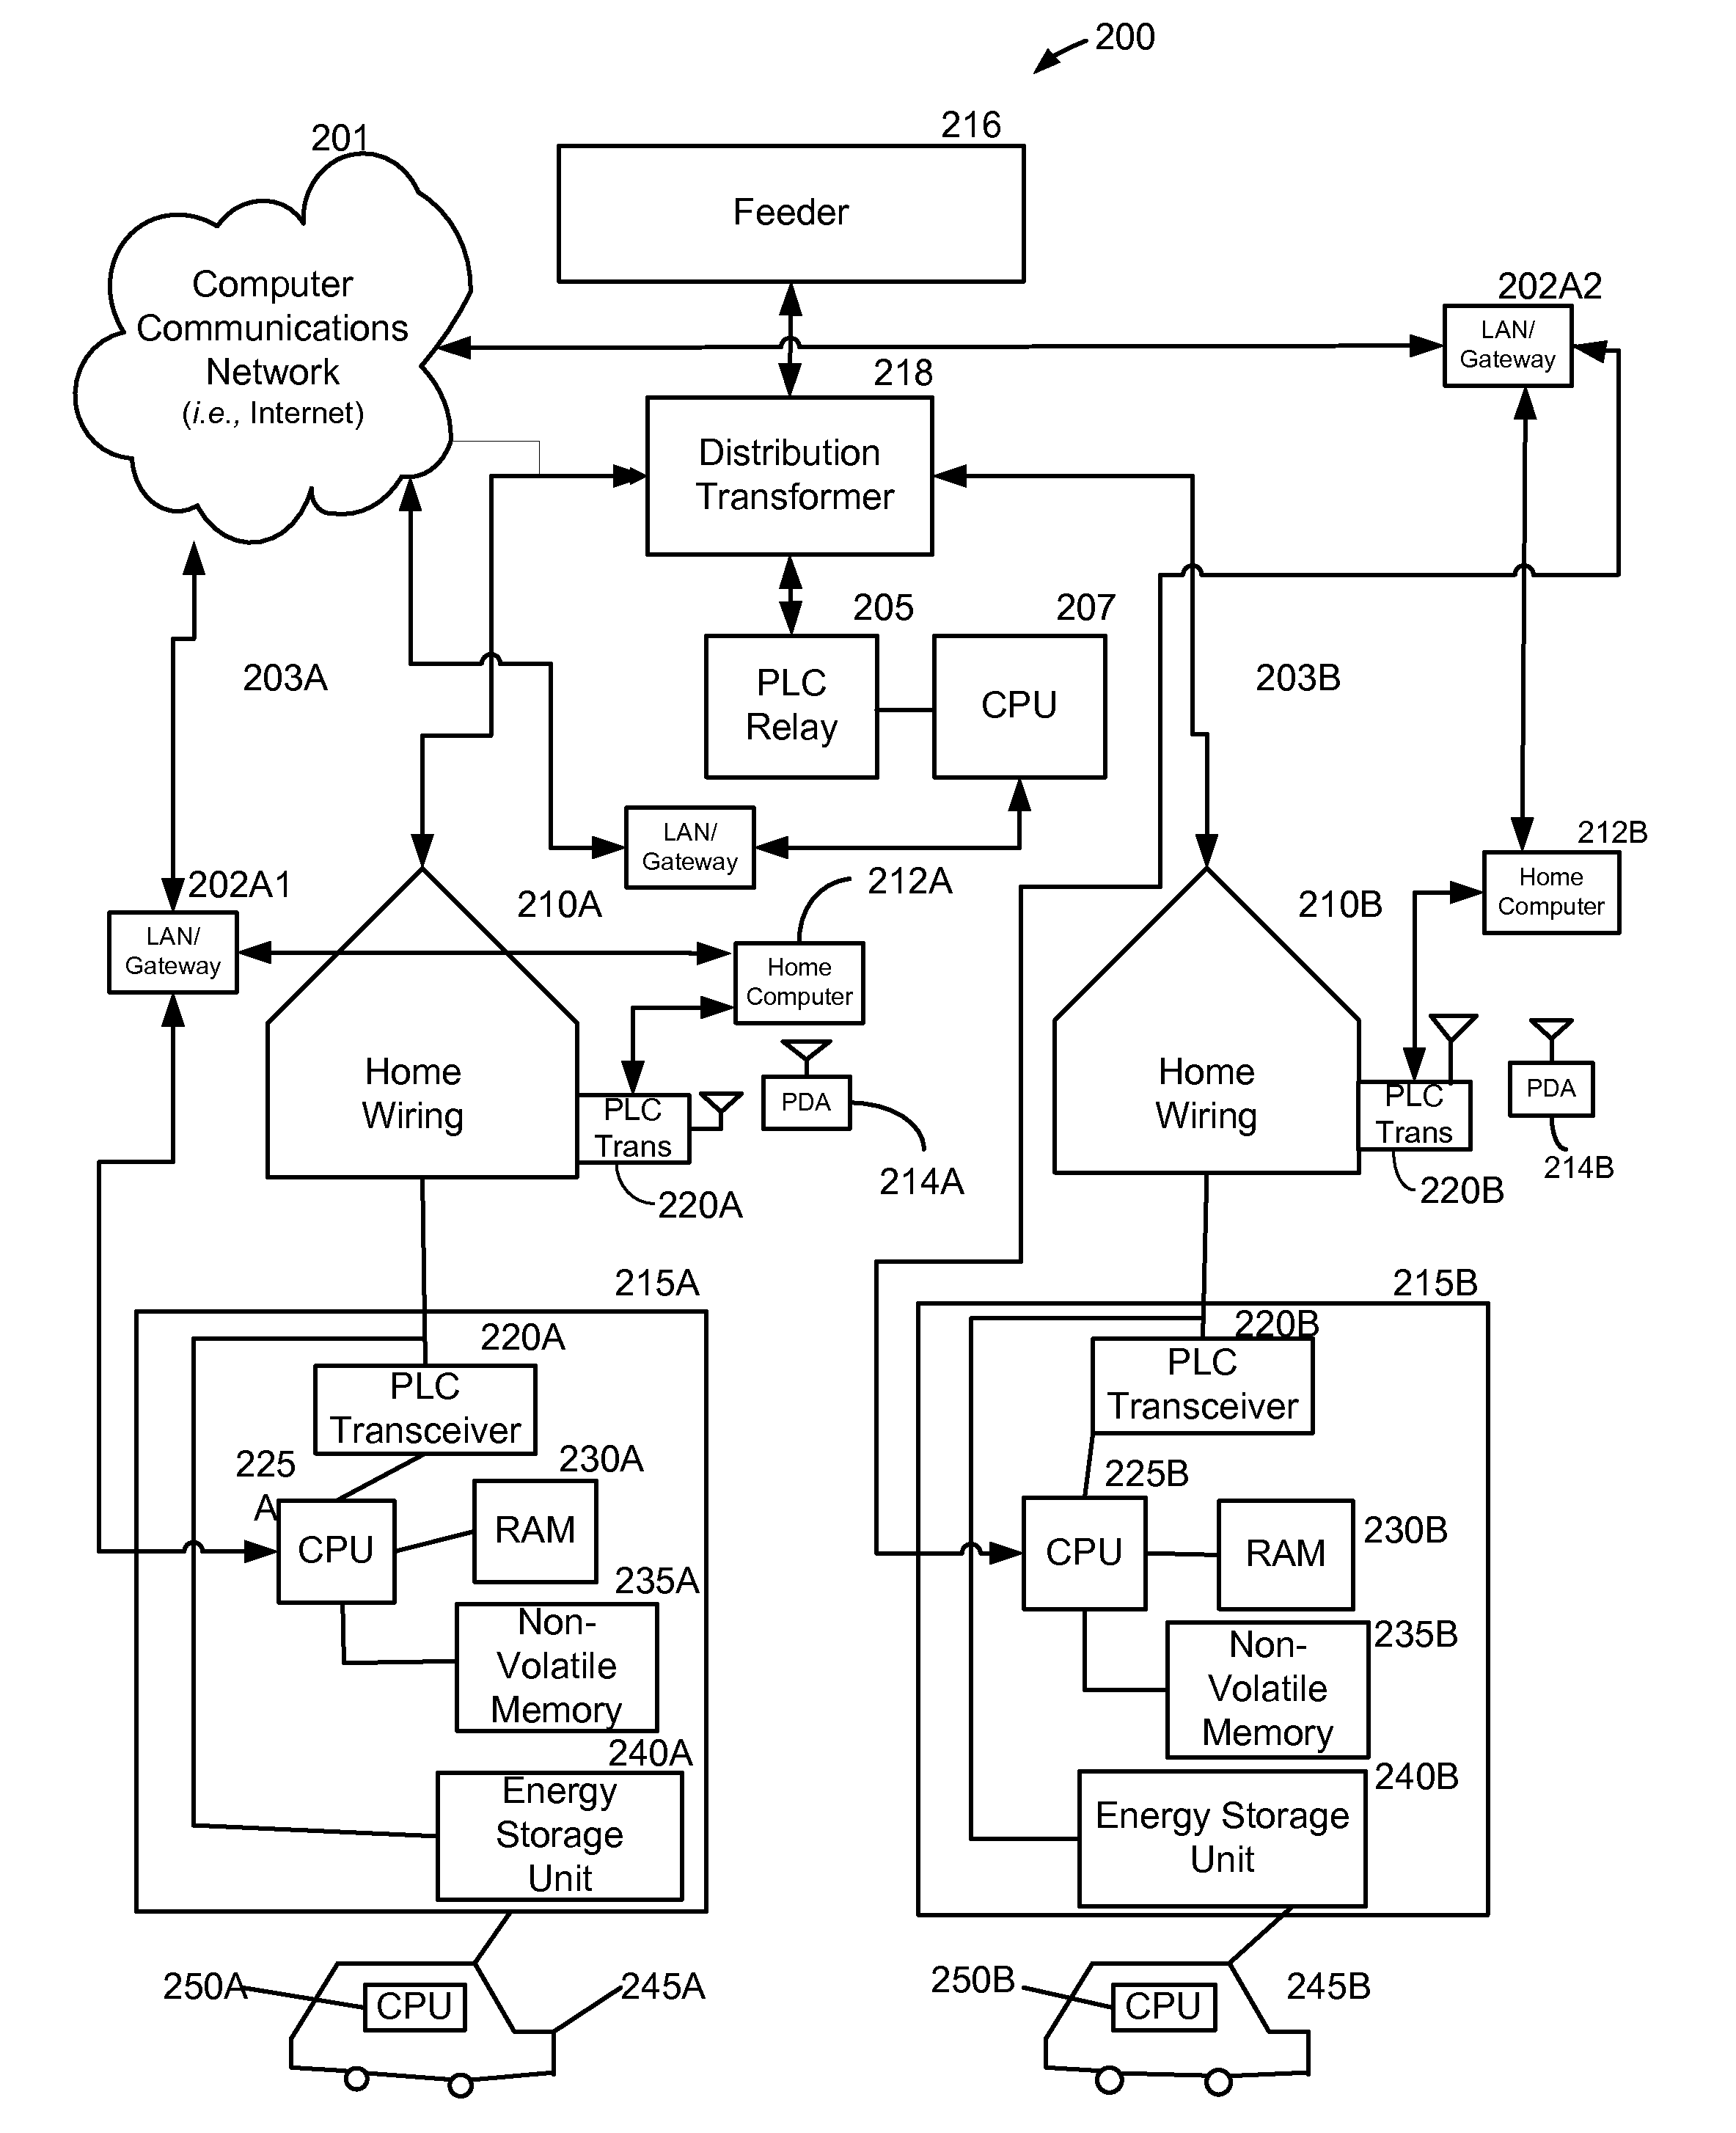 Method and system for co-operative charging of electric vehicles